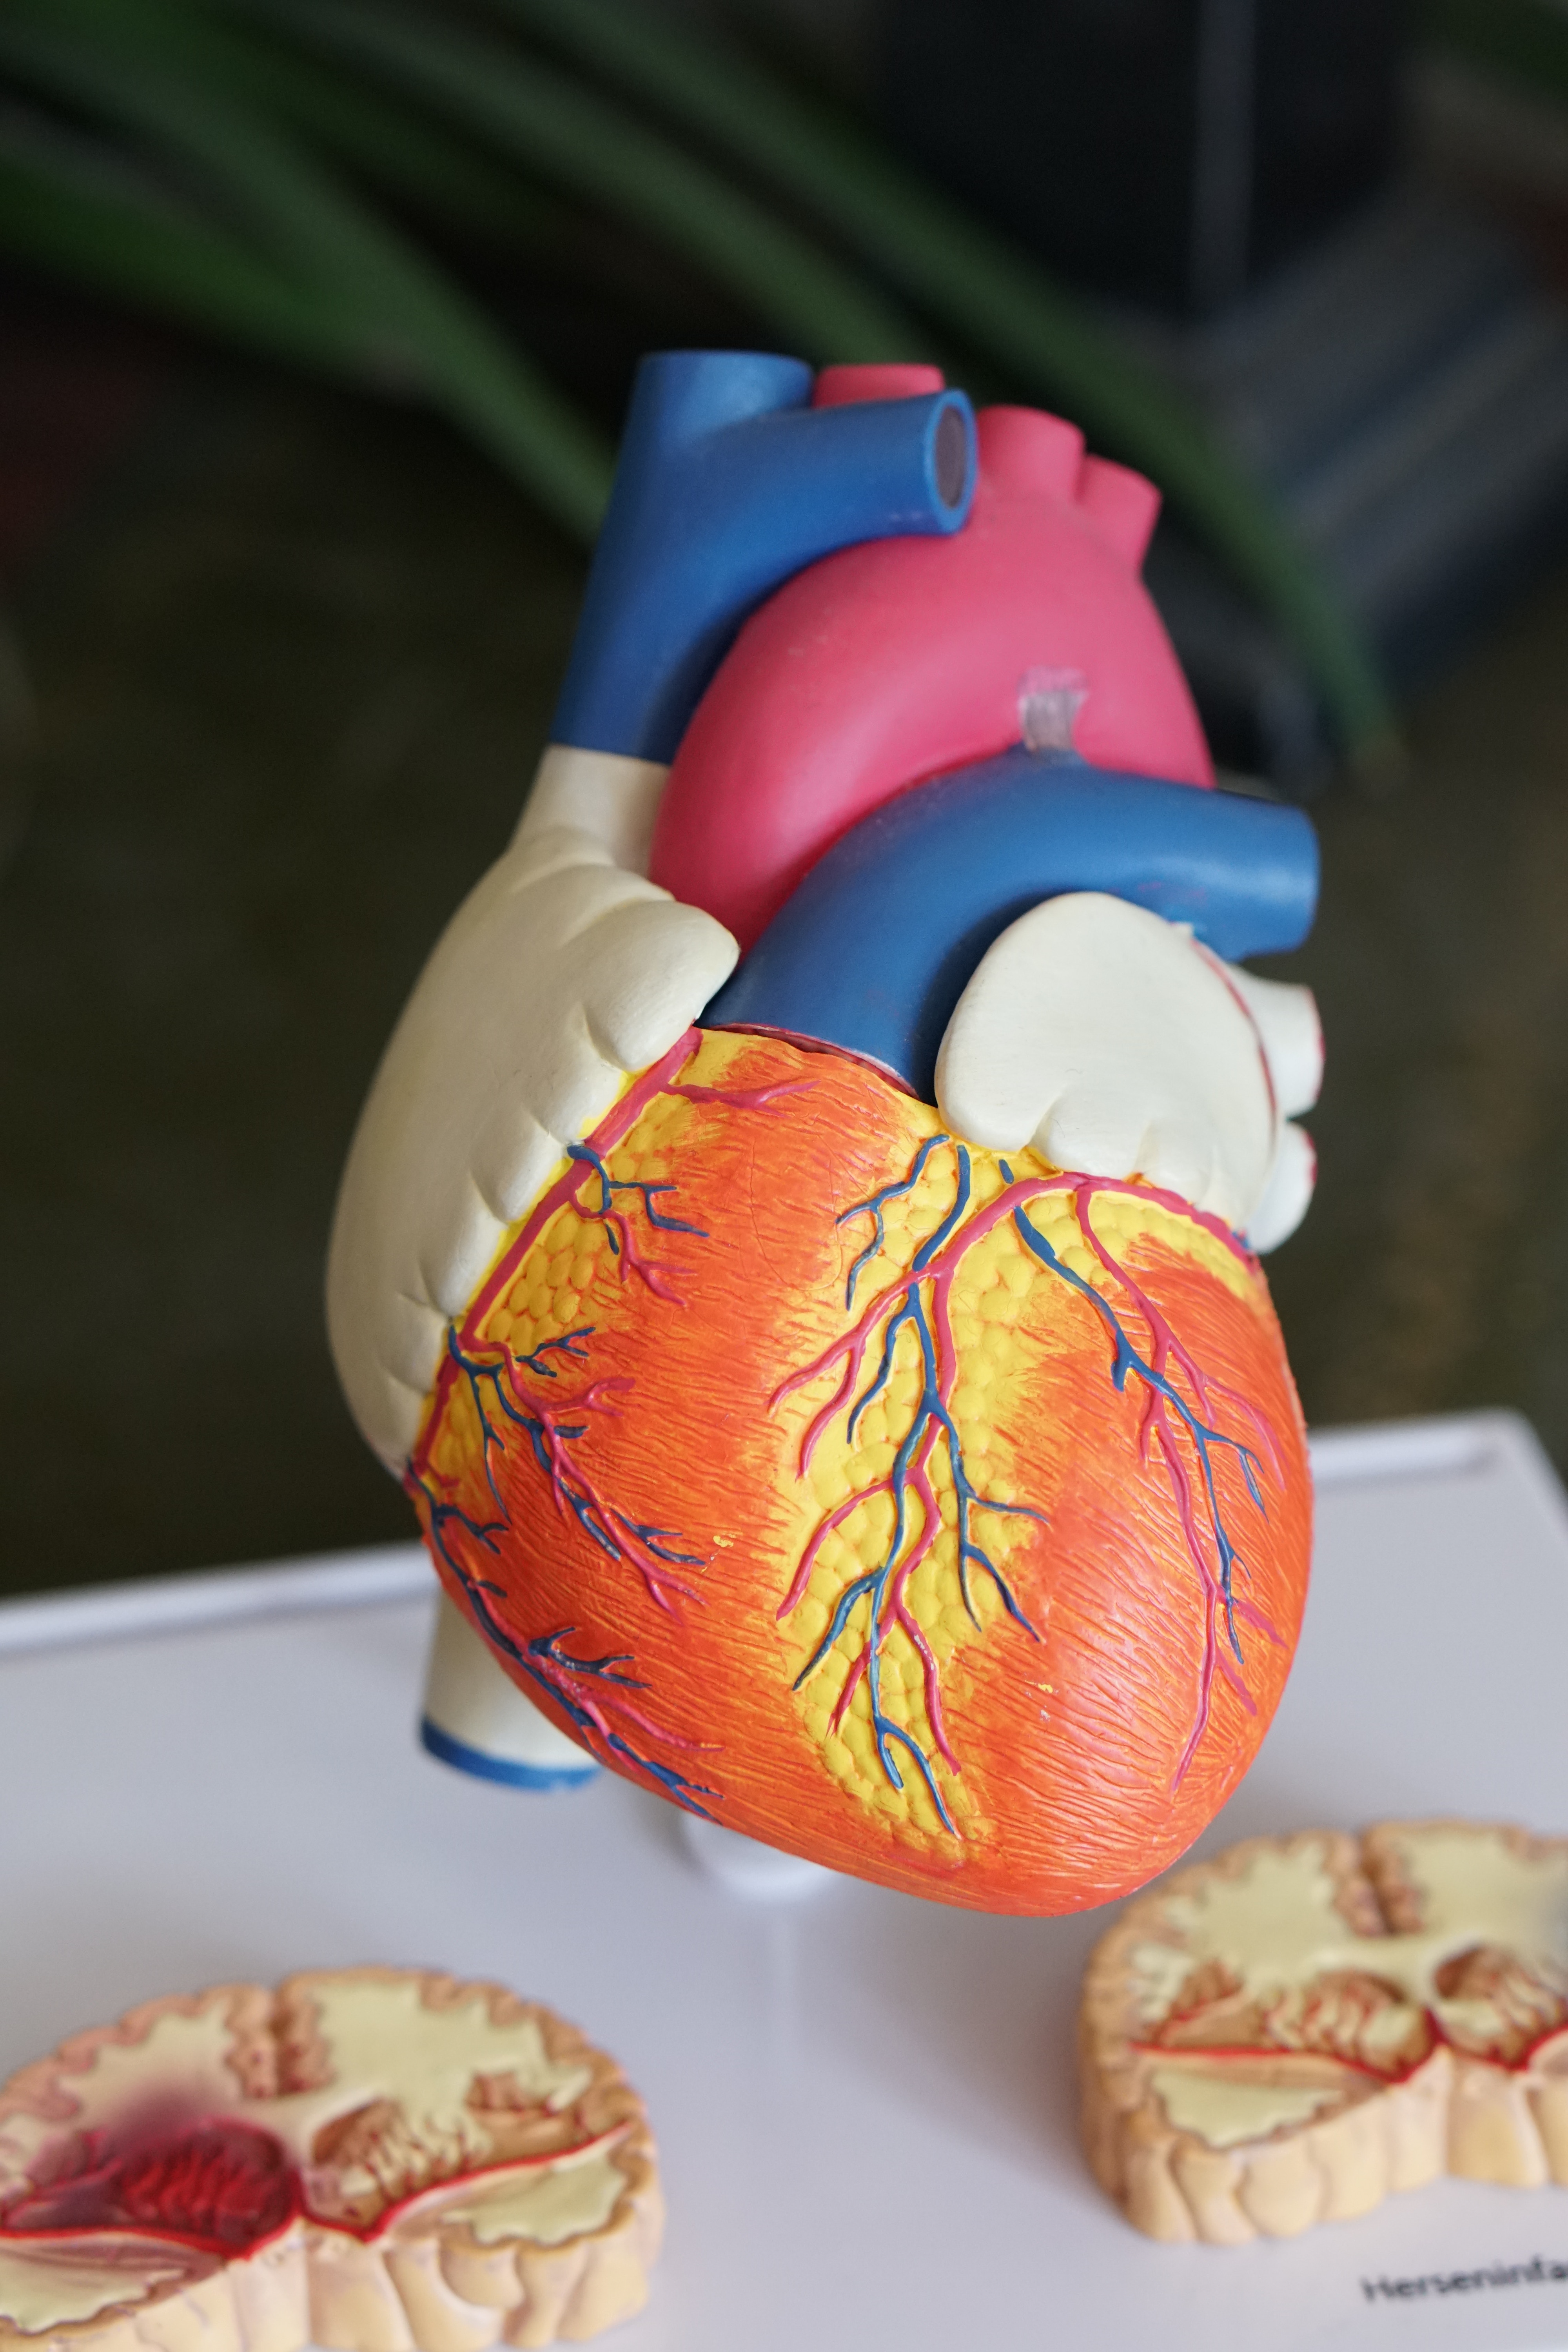 cardiac arrest and what you should know about it